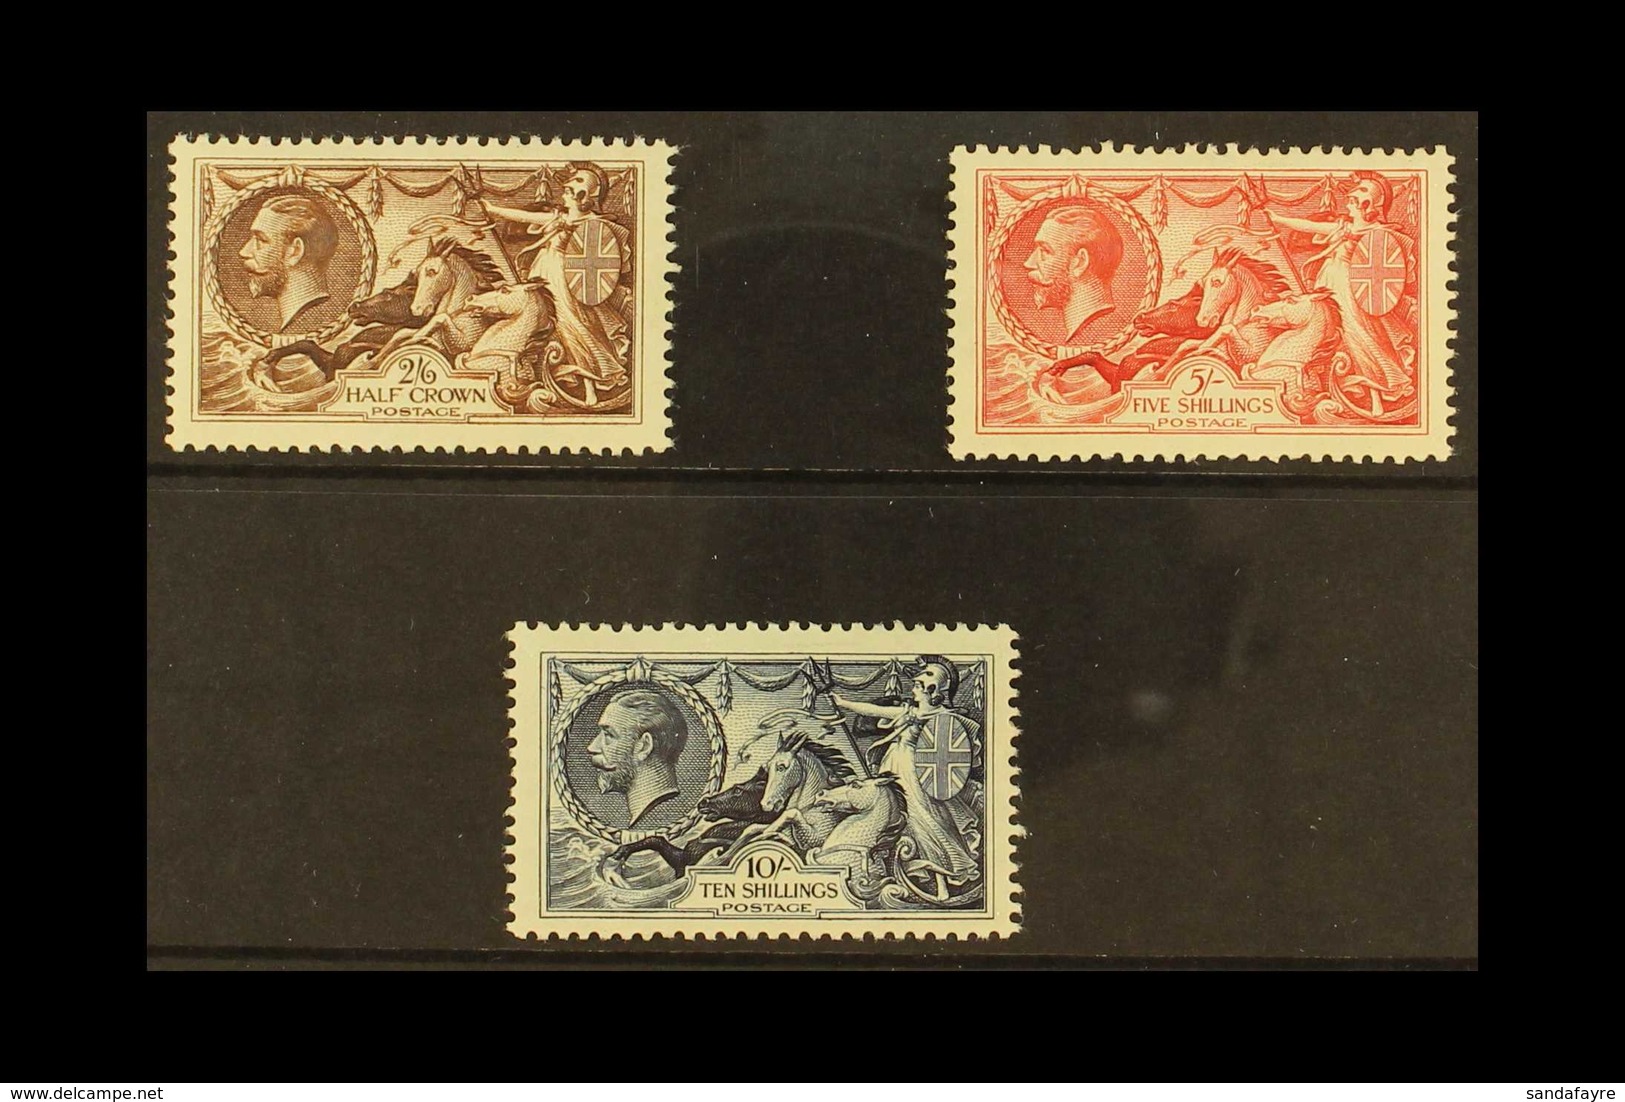 1934 Re-engraved Seahorses Set Complete, SG 450/52, Mint Lightly Hinged. Lovely Quality (3 Stamps) For More Images, Plea - Non Classés